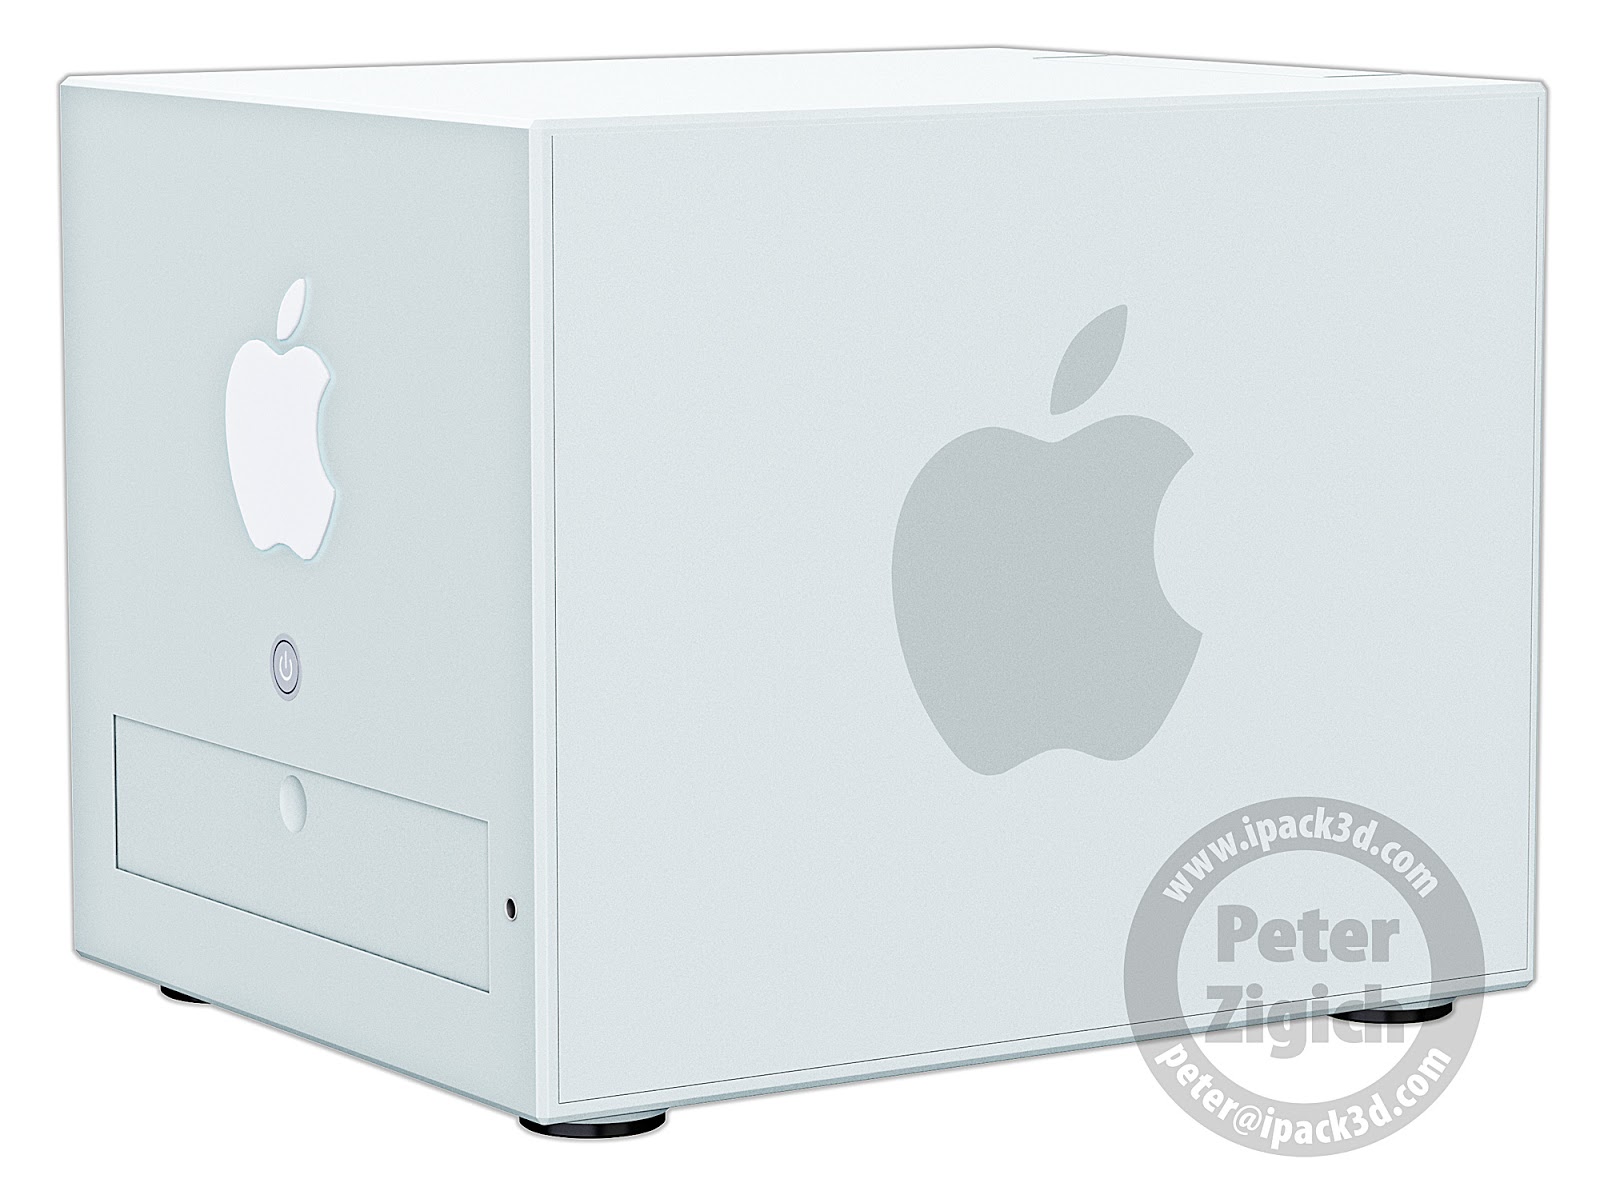 Designer creates new concept for Mac Pro that resembles the old Power Mac G4 Cube